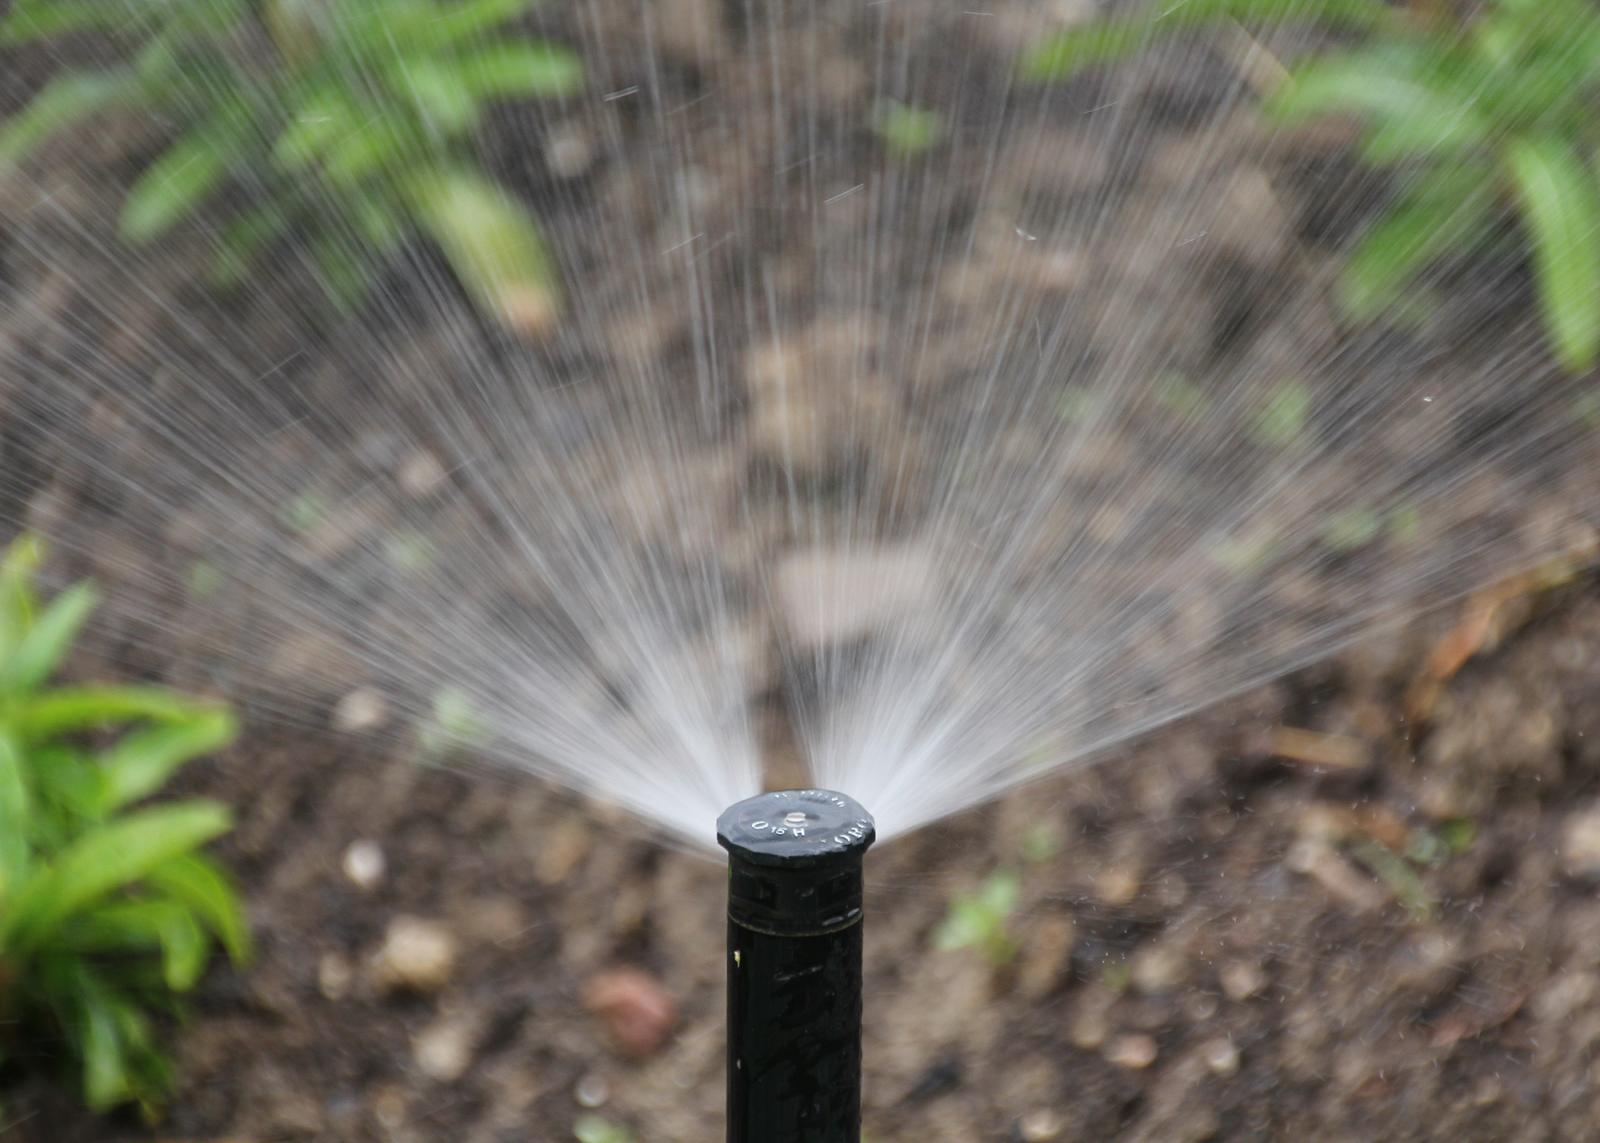 Hire an irrigation professional